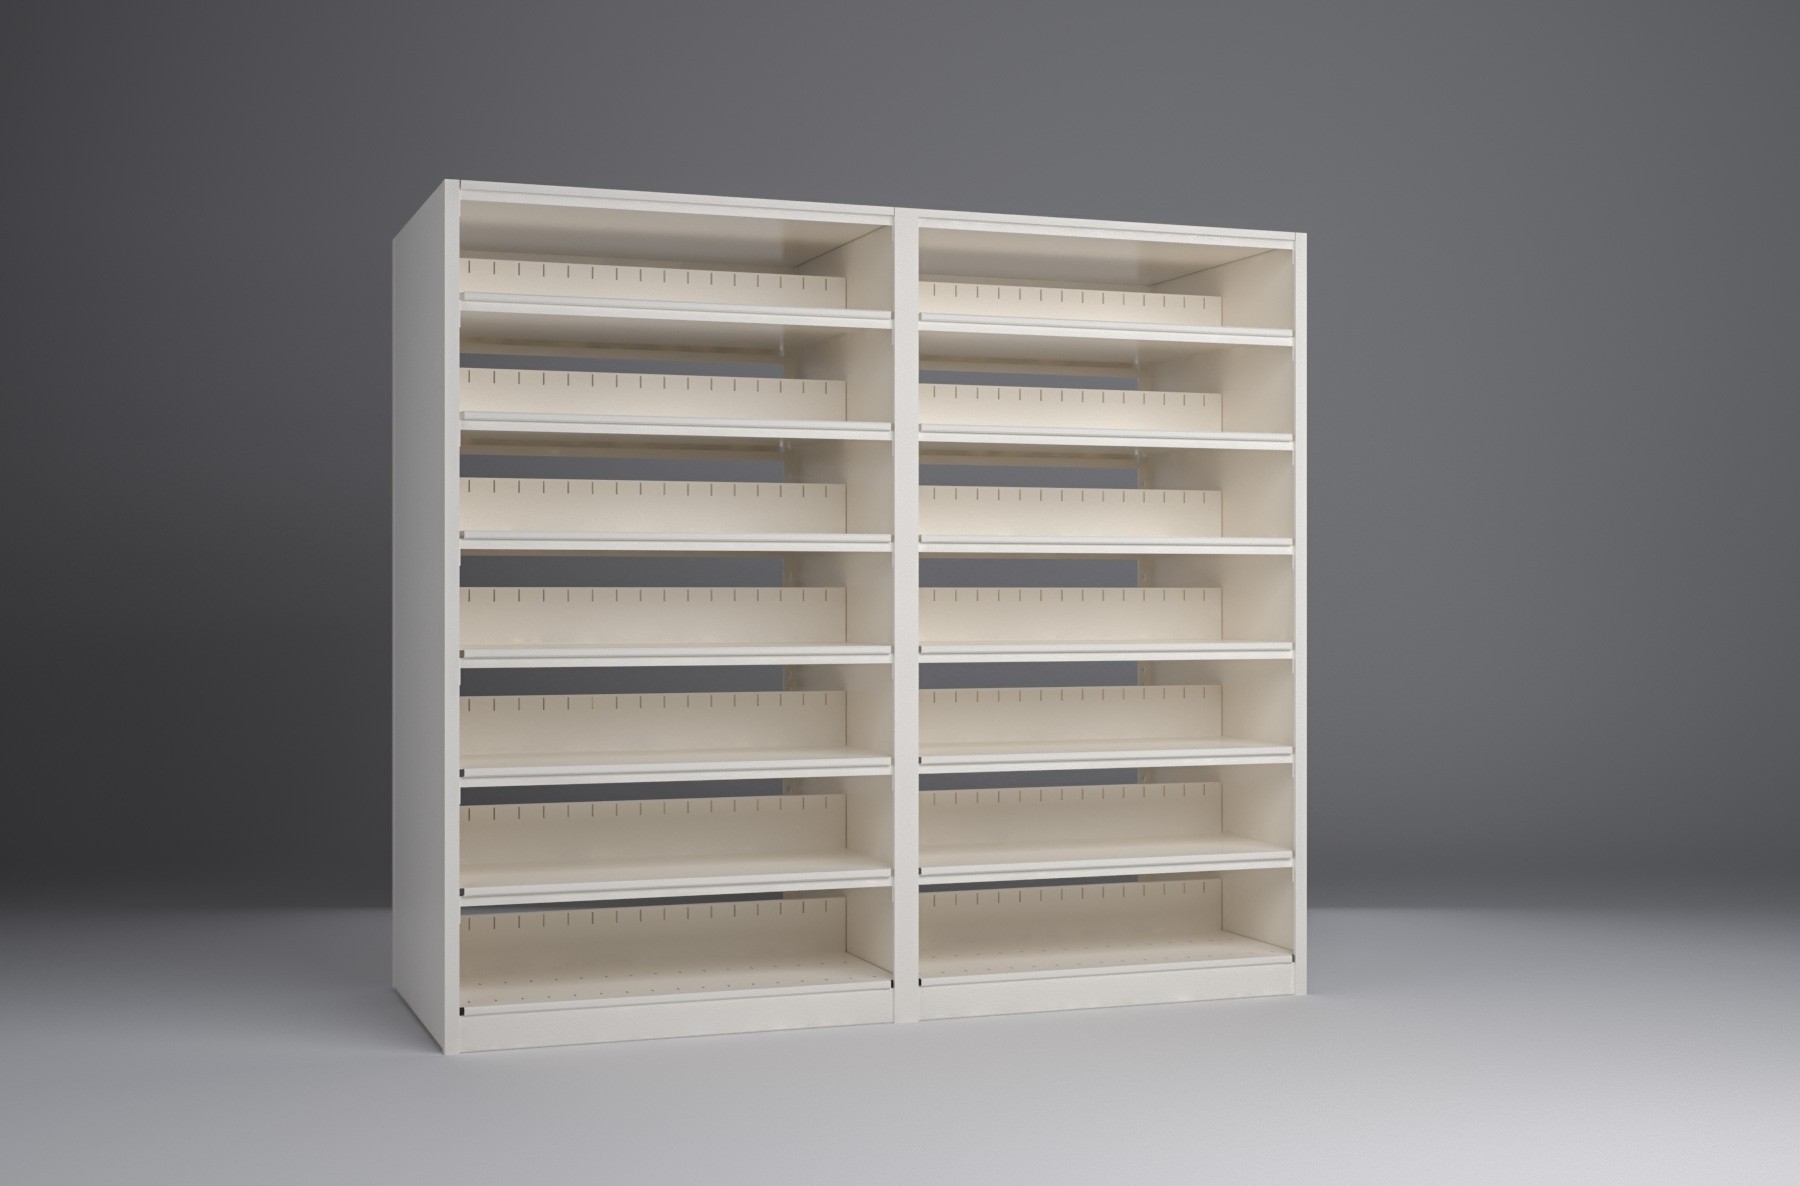 Legal-2 Unit-7 Tier-Double Sided 4 Post Shelving